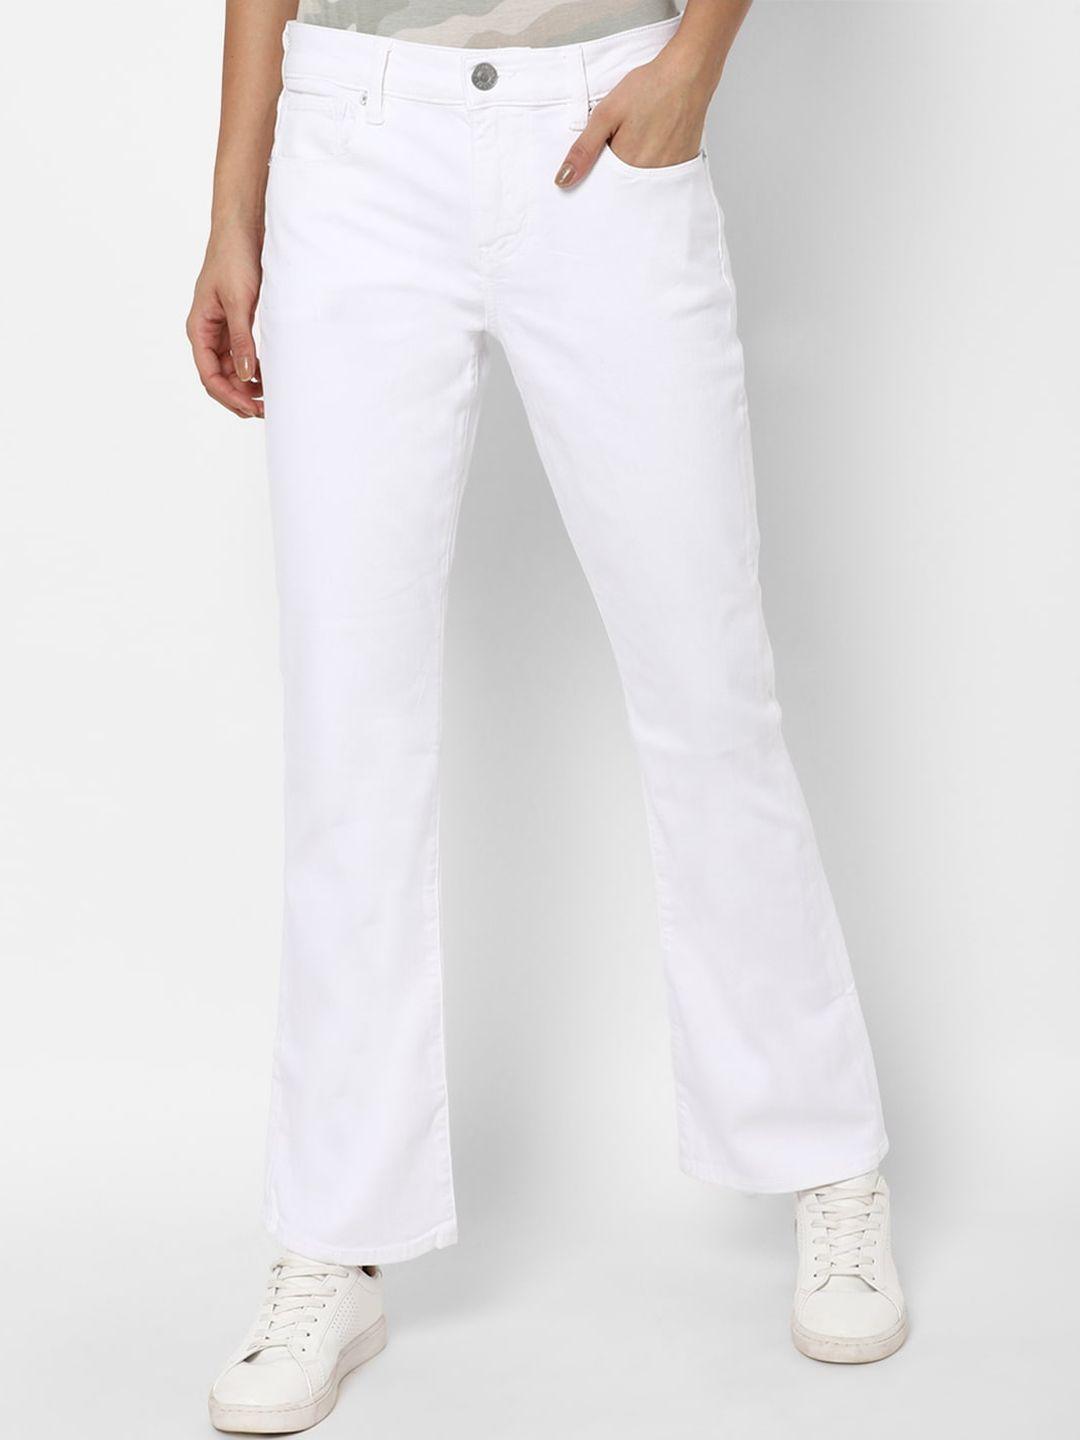 american-eagle-outfitters-women-white-jeans